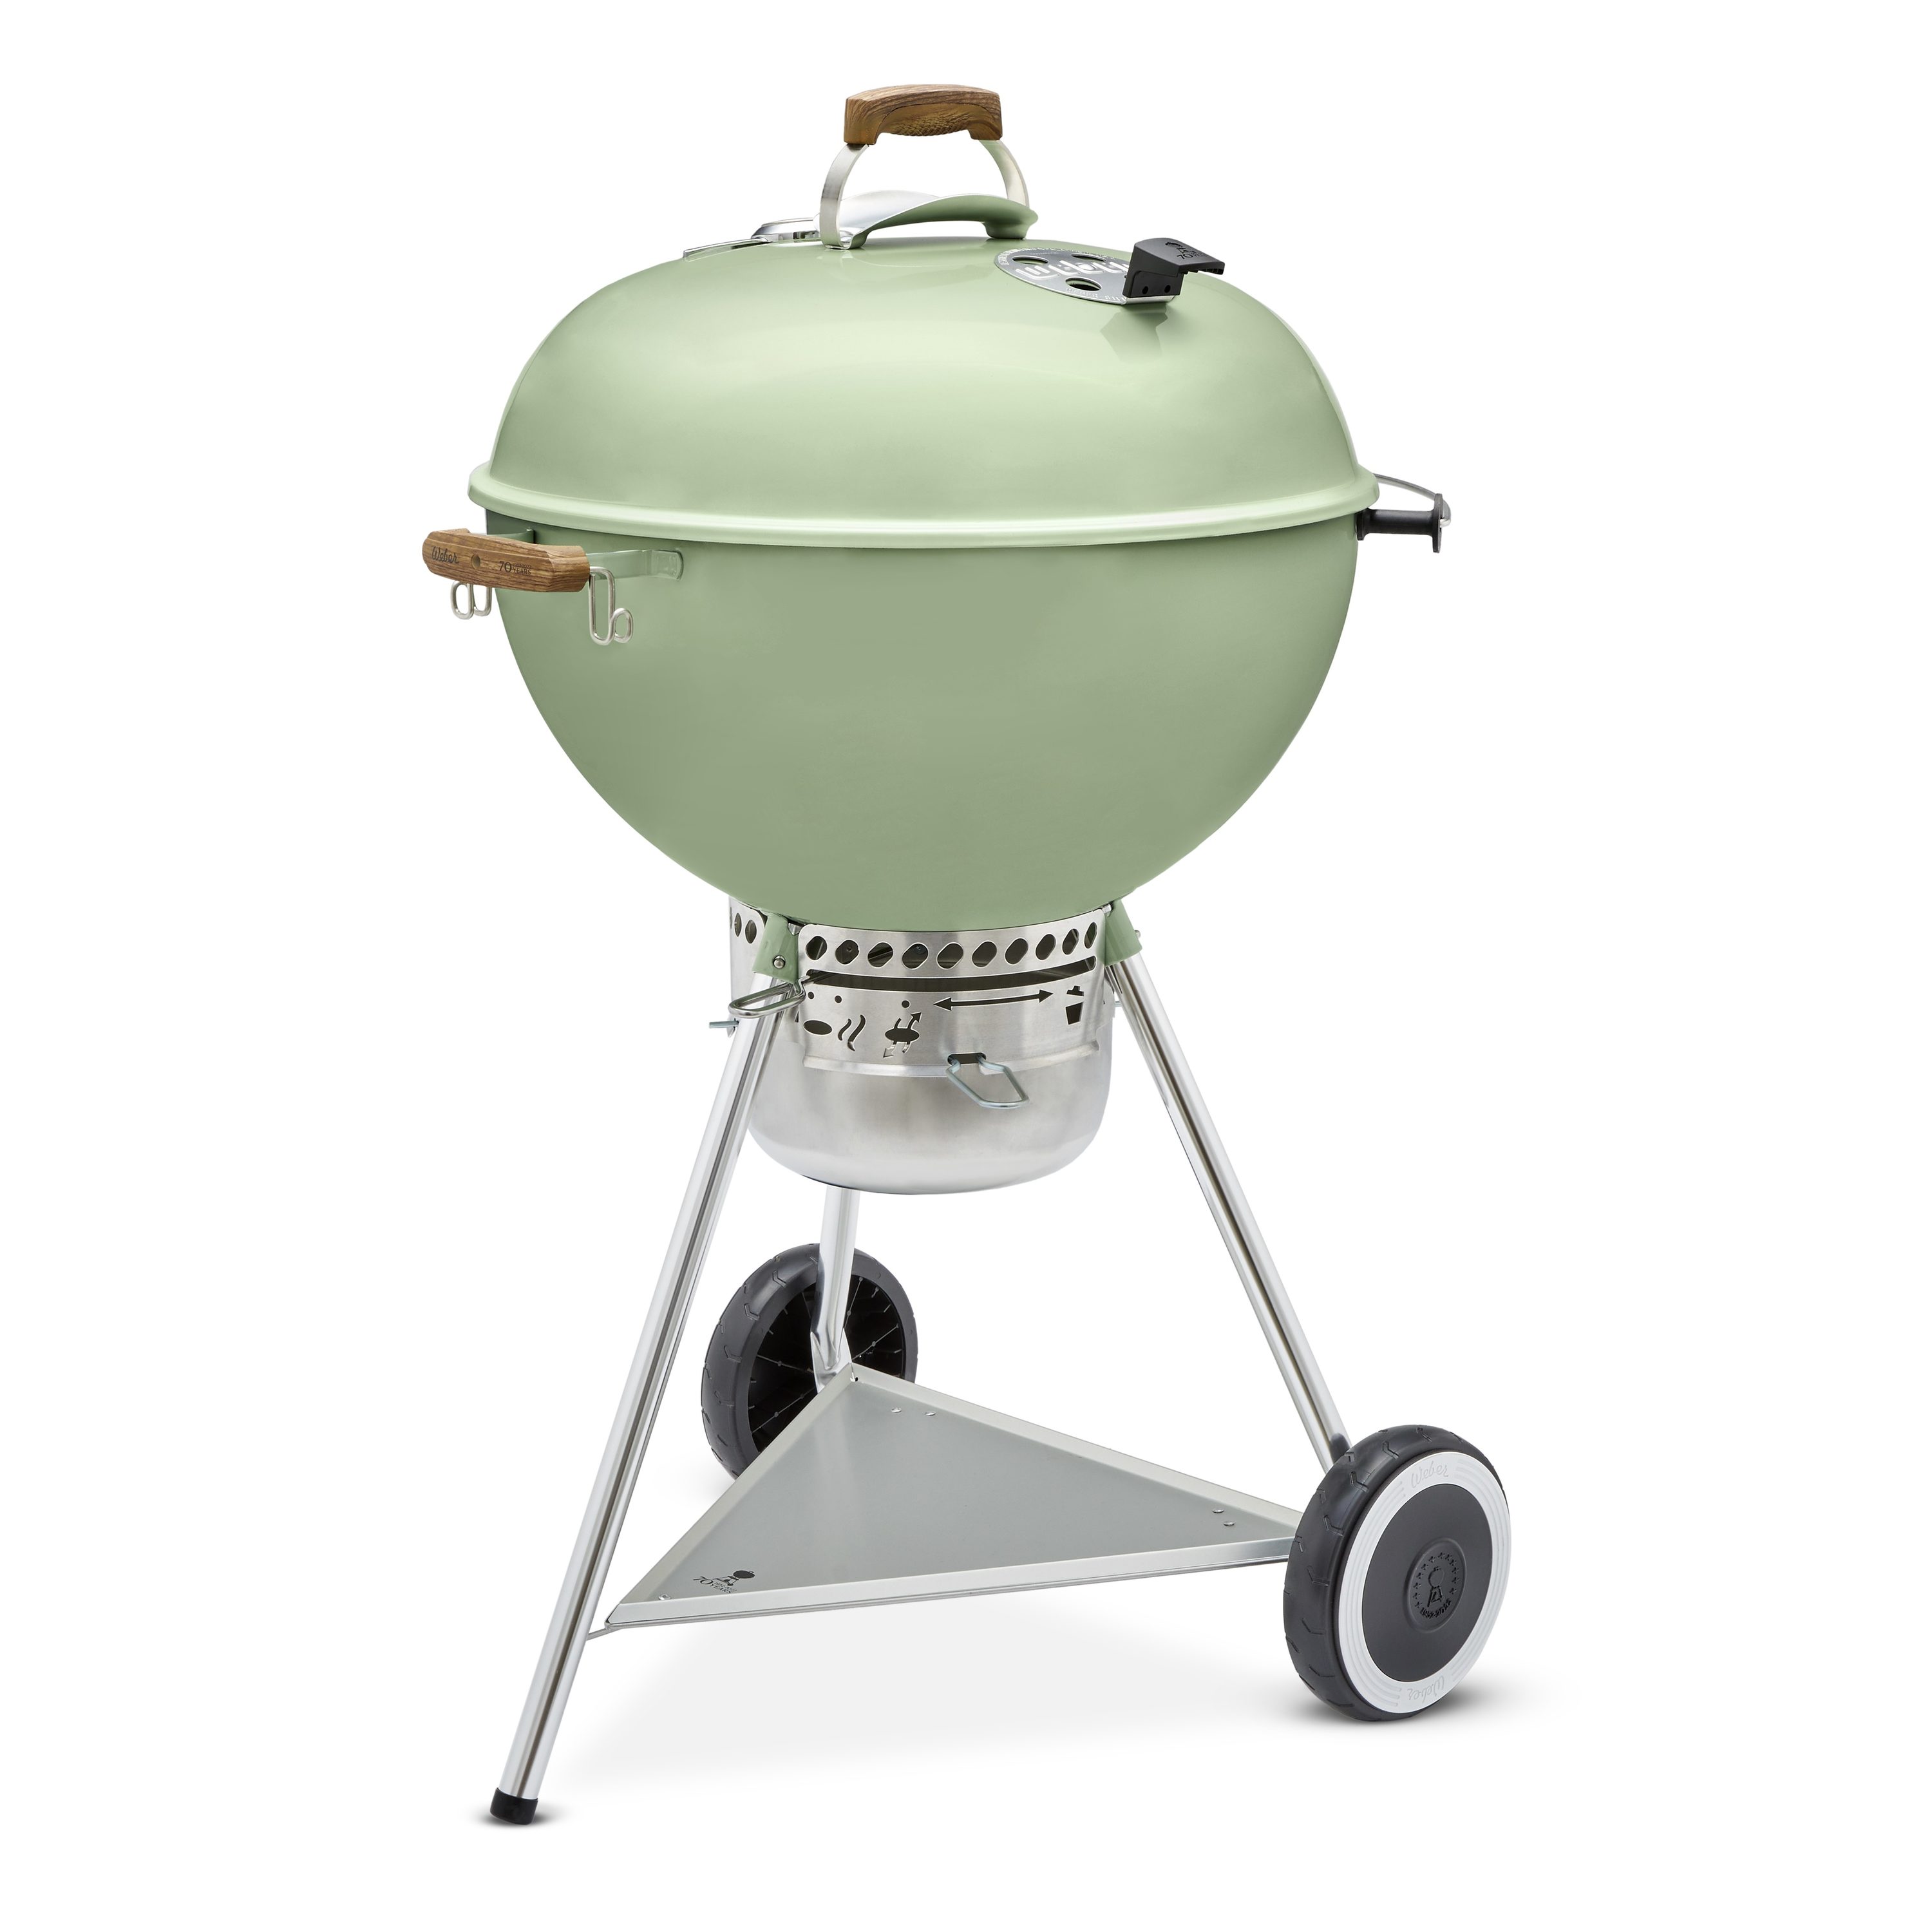 werk Komkommer Celsius Weber 70th Anniversary Kettle 22-in W Diner Green Kettle Charcoal Grill in  the Charcoal Grills department at Lowes.com